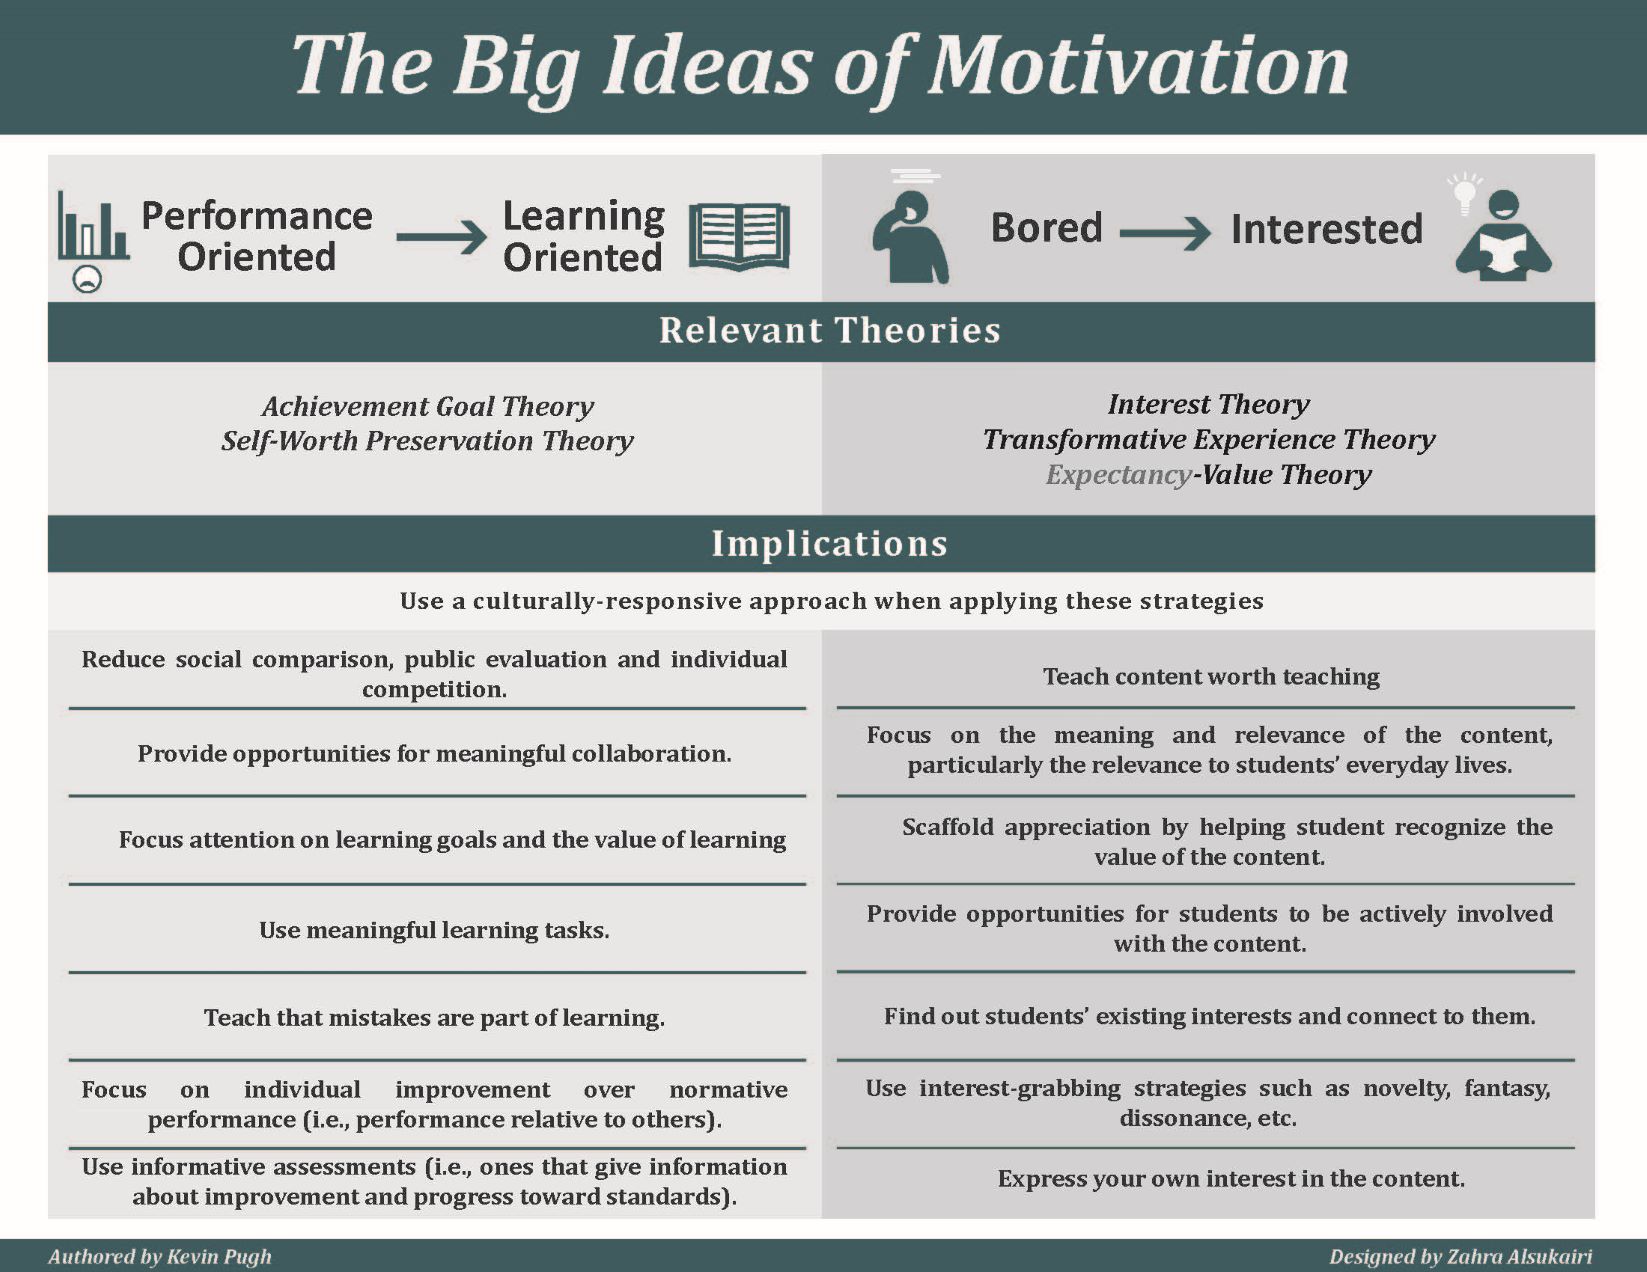 image discusses two ideas of motivation